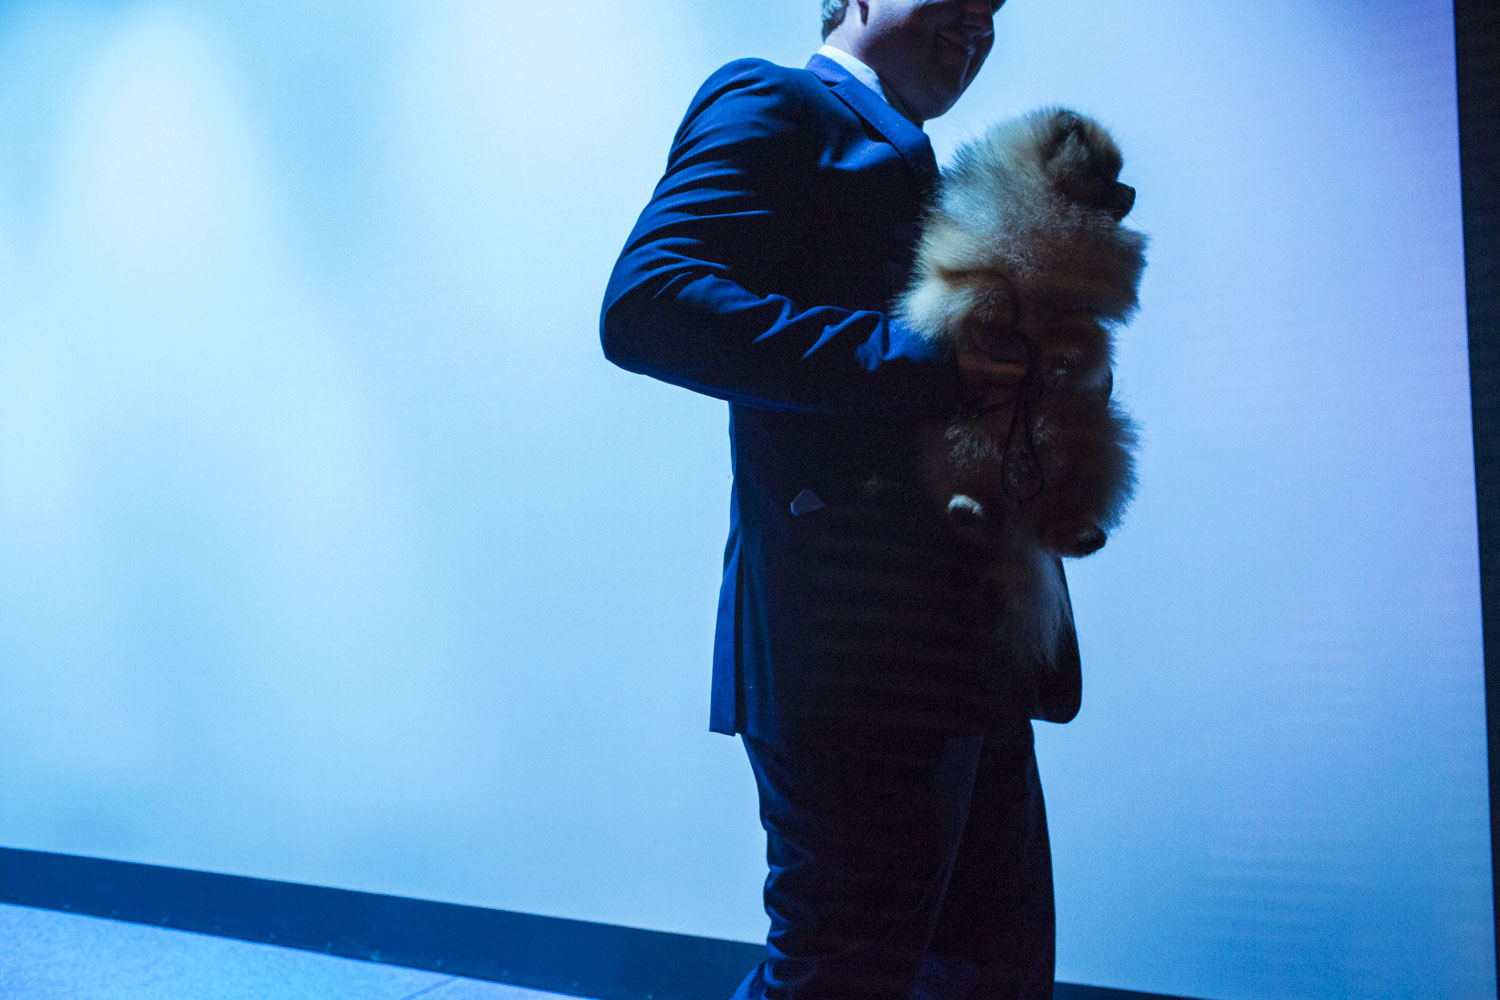 HELSINKI, FINLAND - AUG 9: An unidentified man carries an unidentified dog from the main stage during the 2014 World Dog Show on Saturday, August 9th, 2014, in Helsinki, Finland. (Photo by Landon Nordeman)